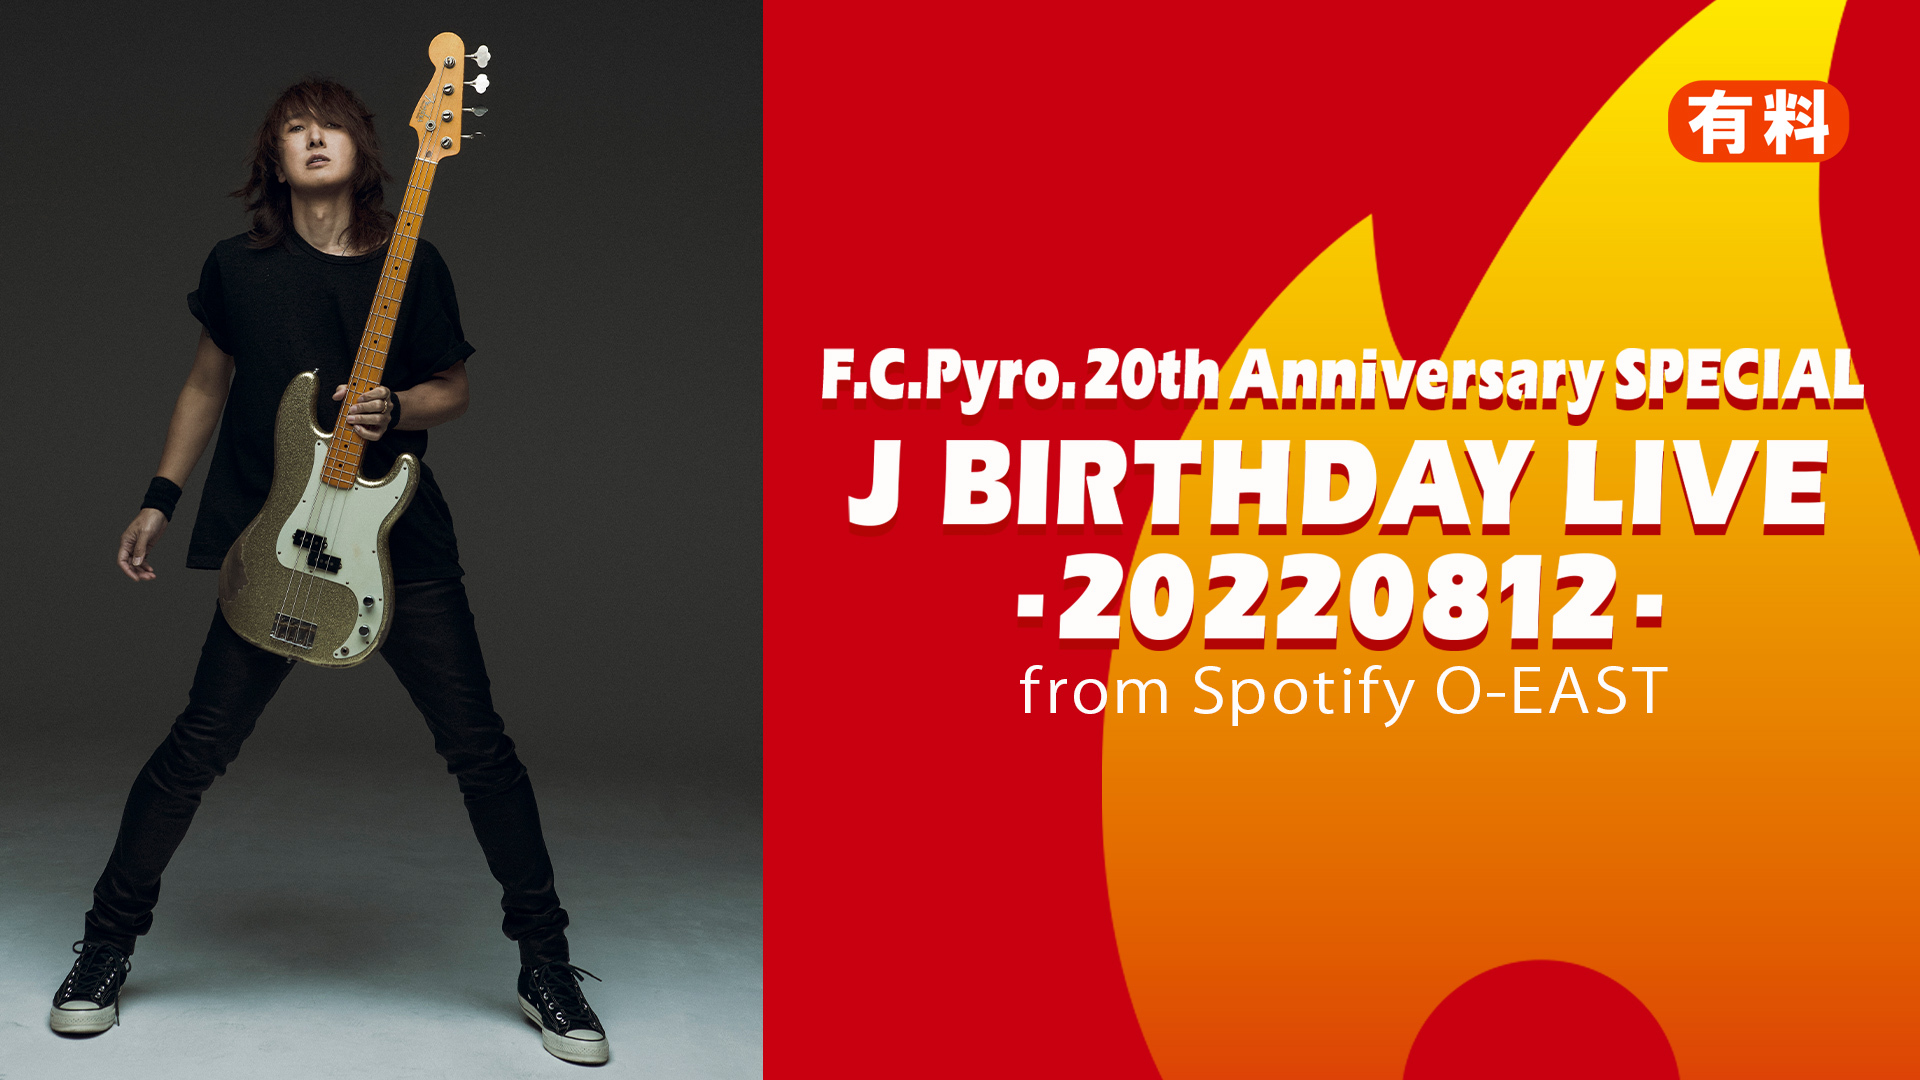 F.C.Pyro. 20th Anniversary SPECIAL 【J BIRTHDAY LIVE -20220812-】ニコ生視聴チケット